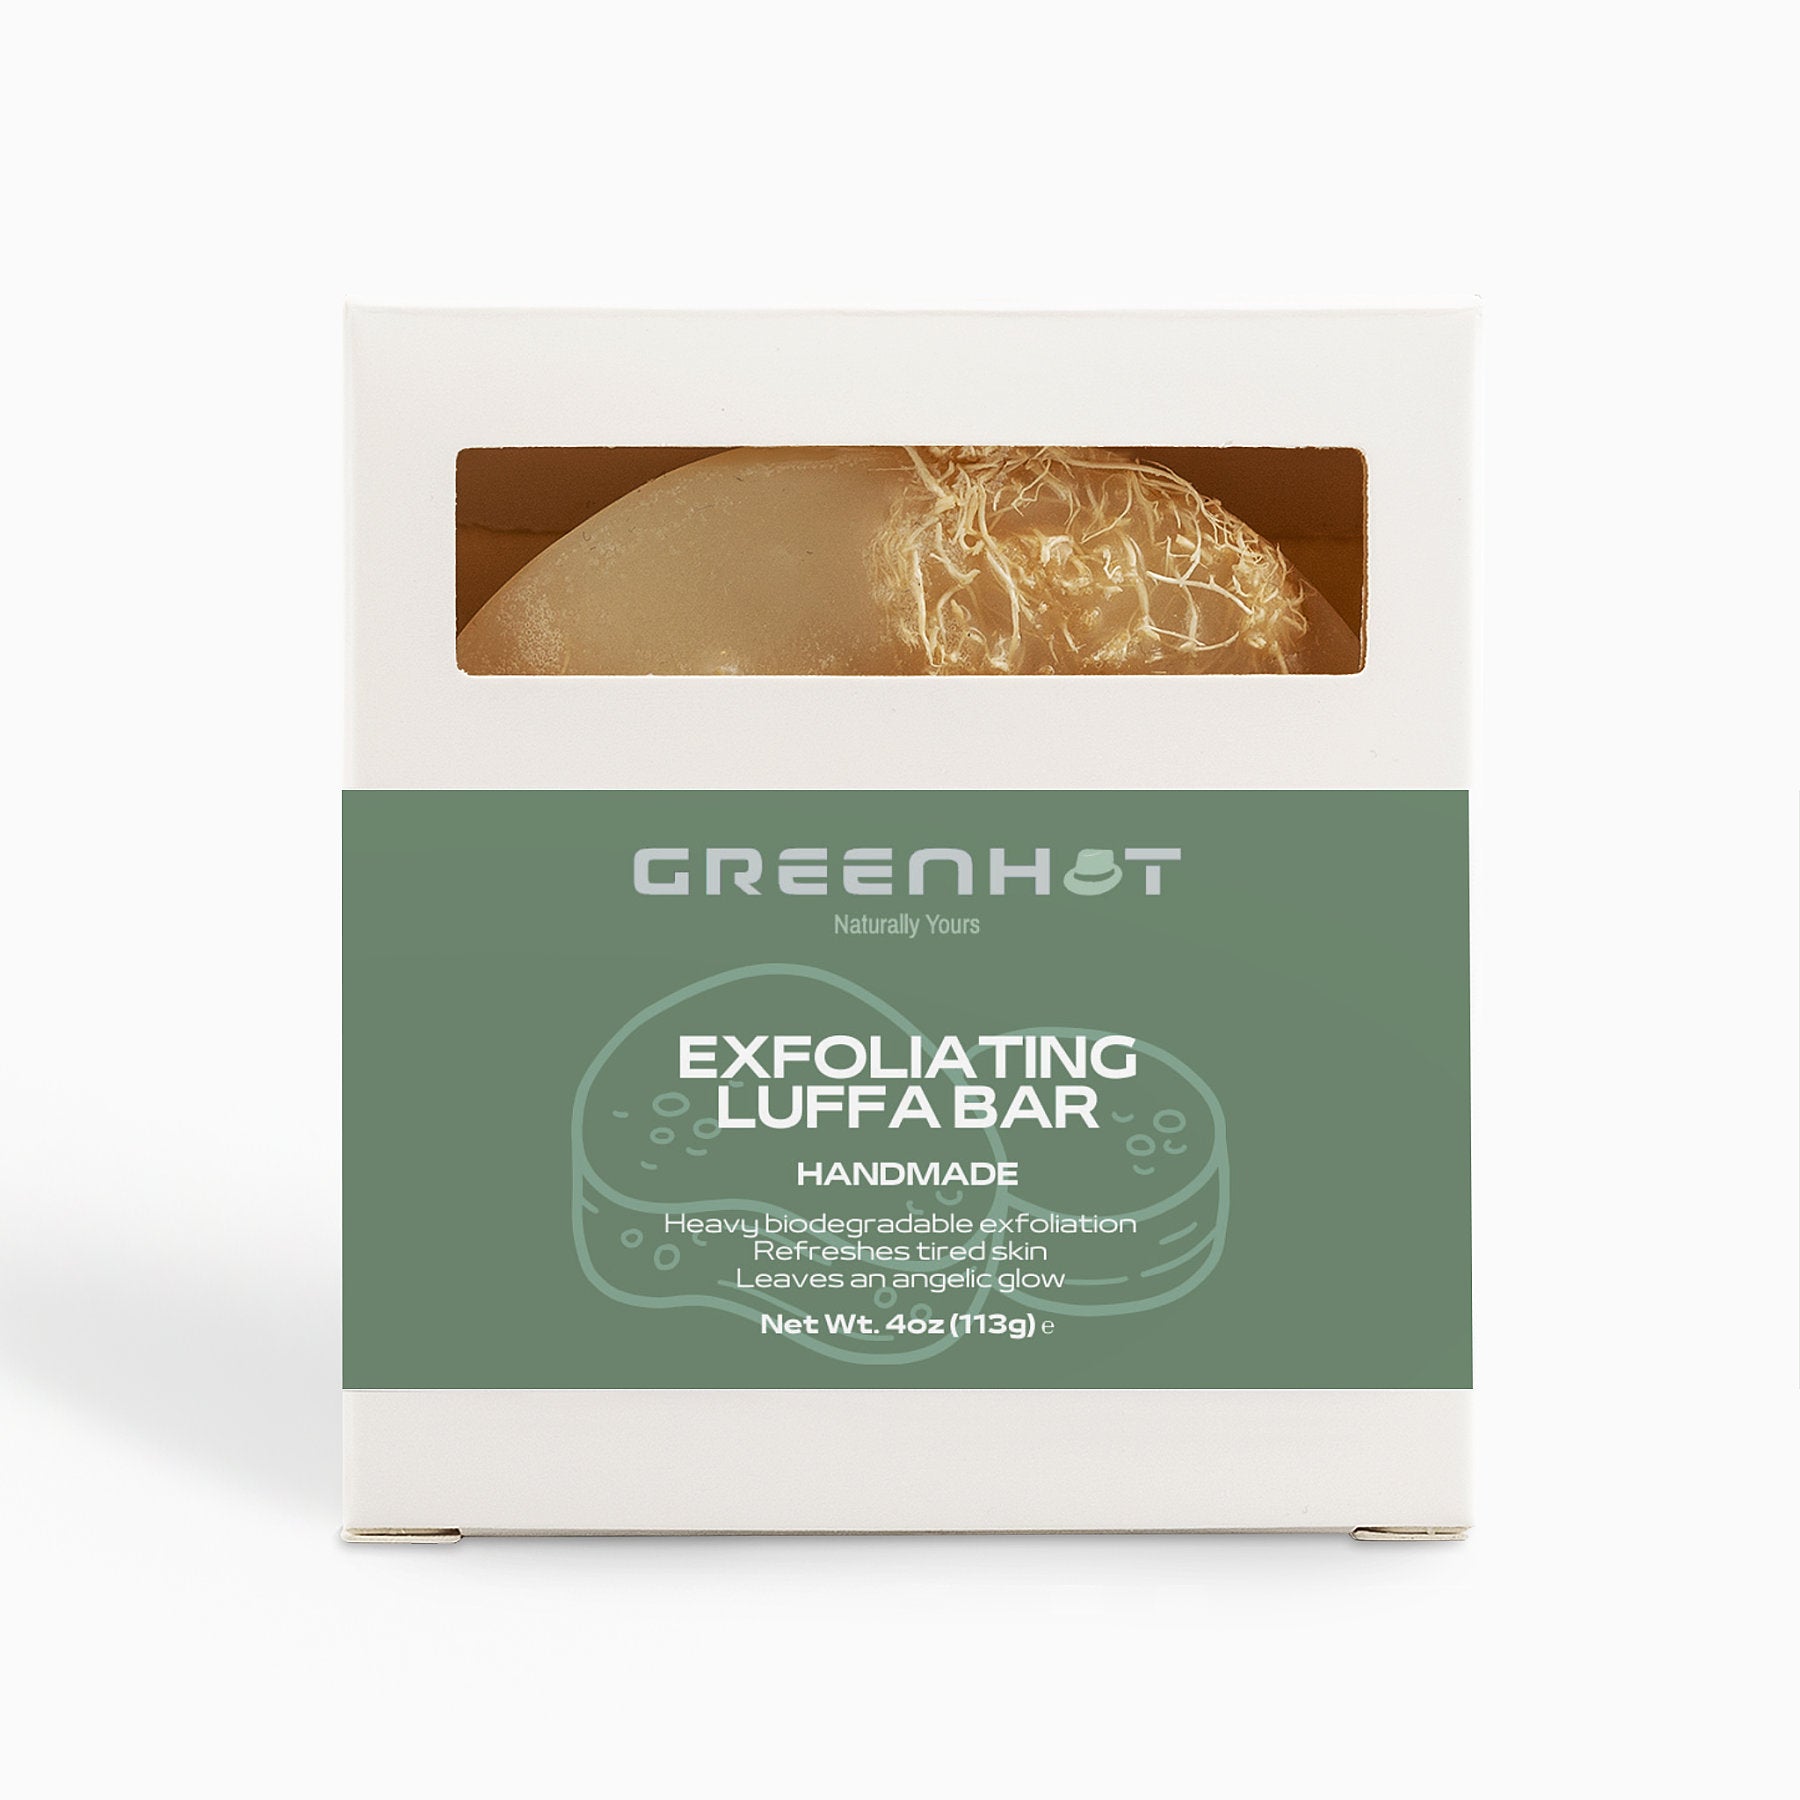 Box of GreenHat exfoliating hemp luffa bar soap on a white background, emphasizing its natural and handmade qualities.